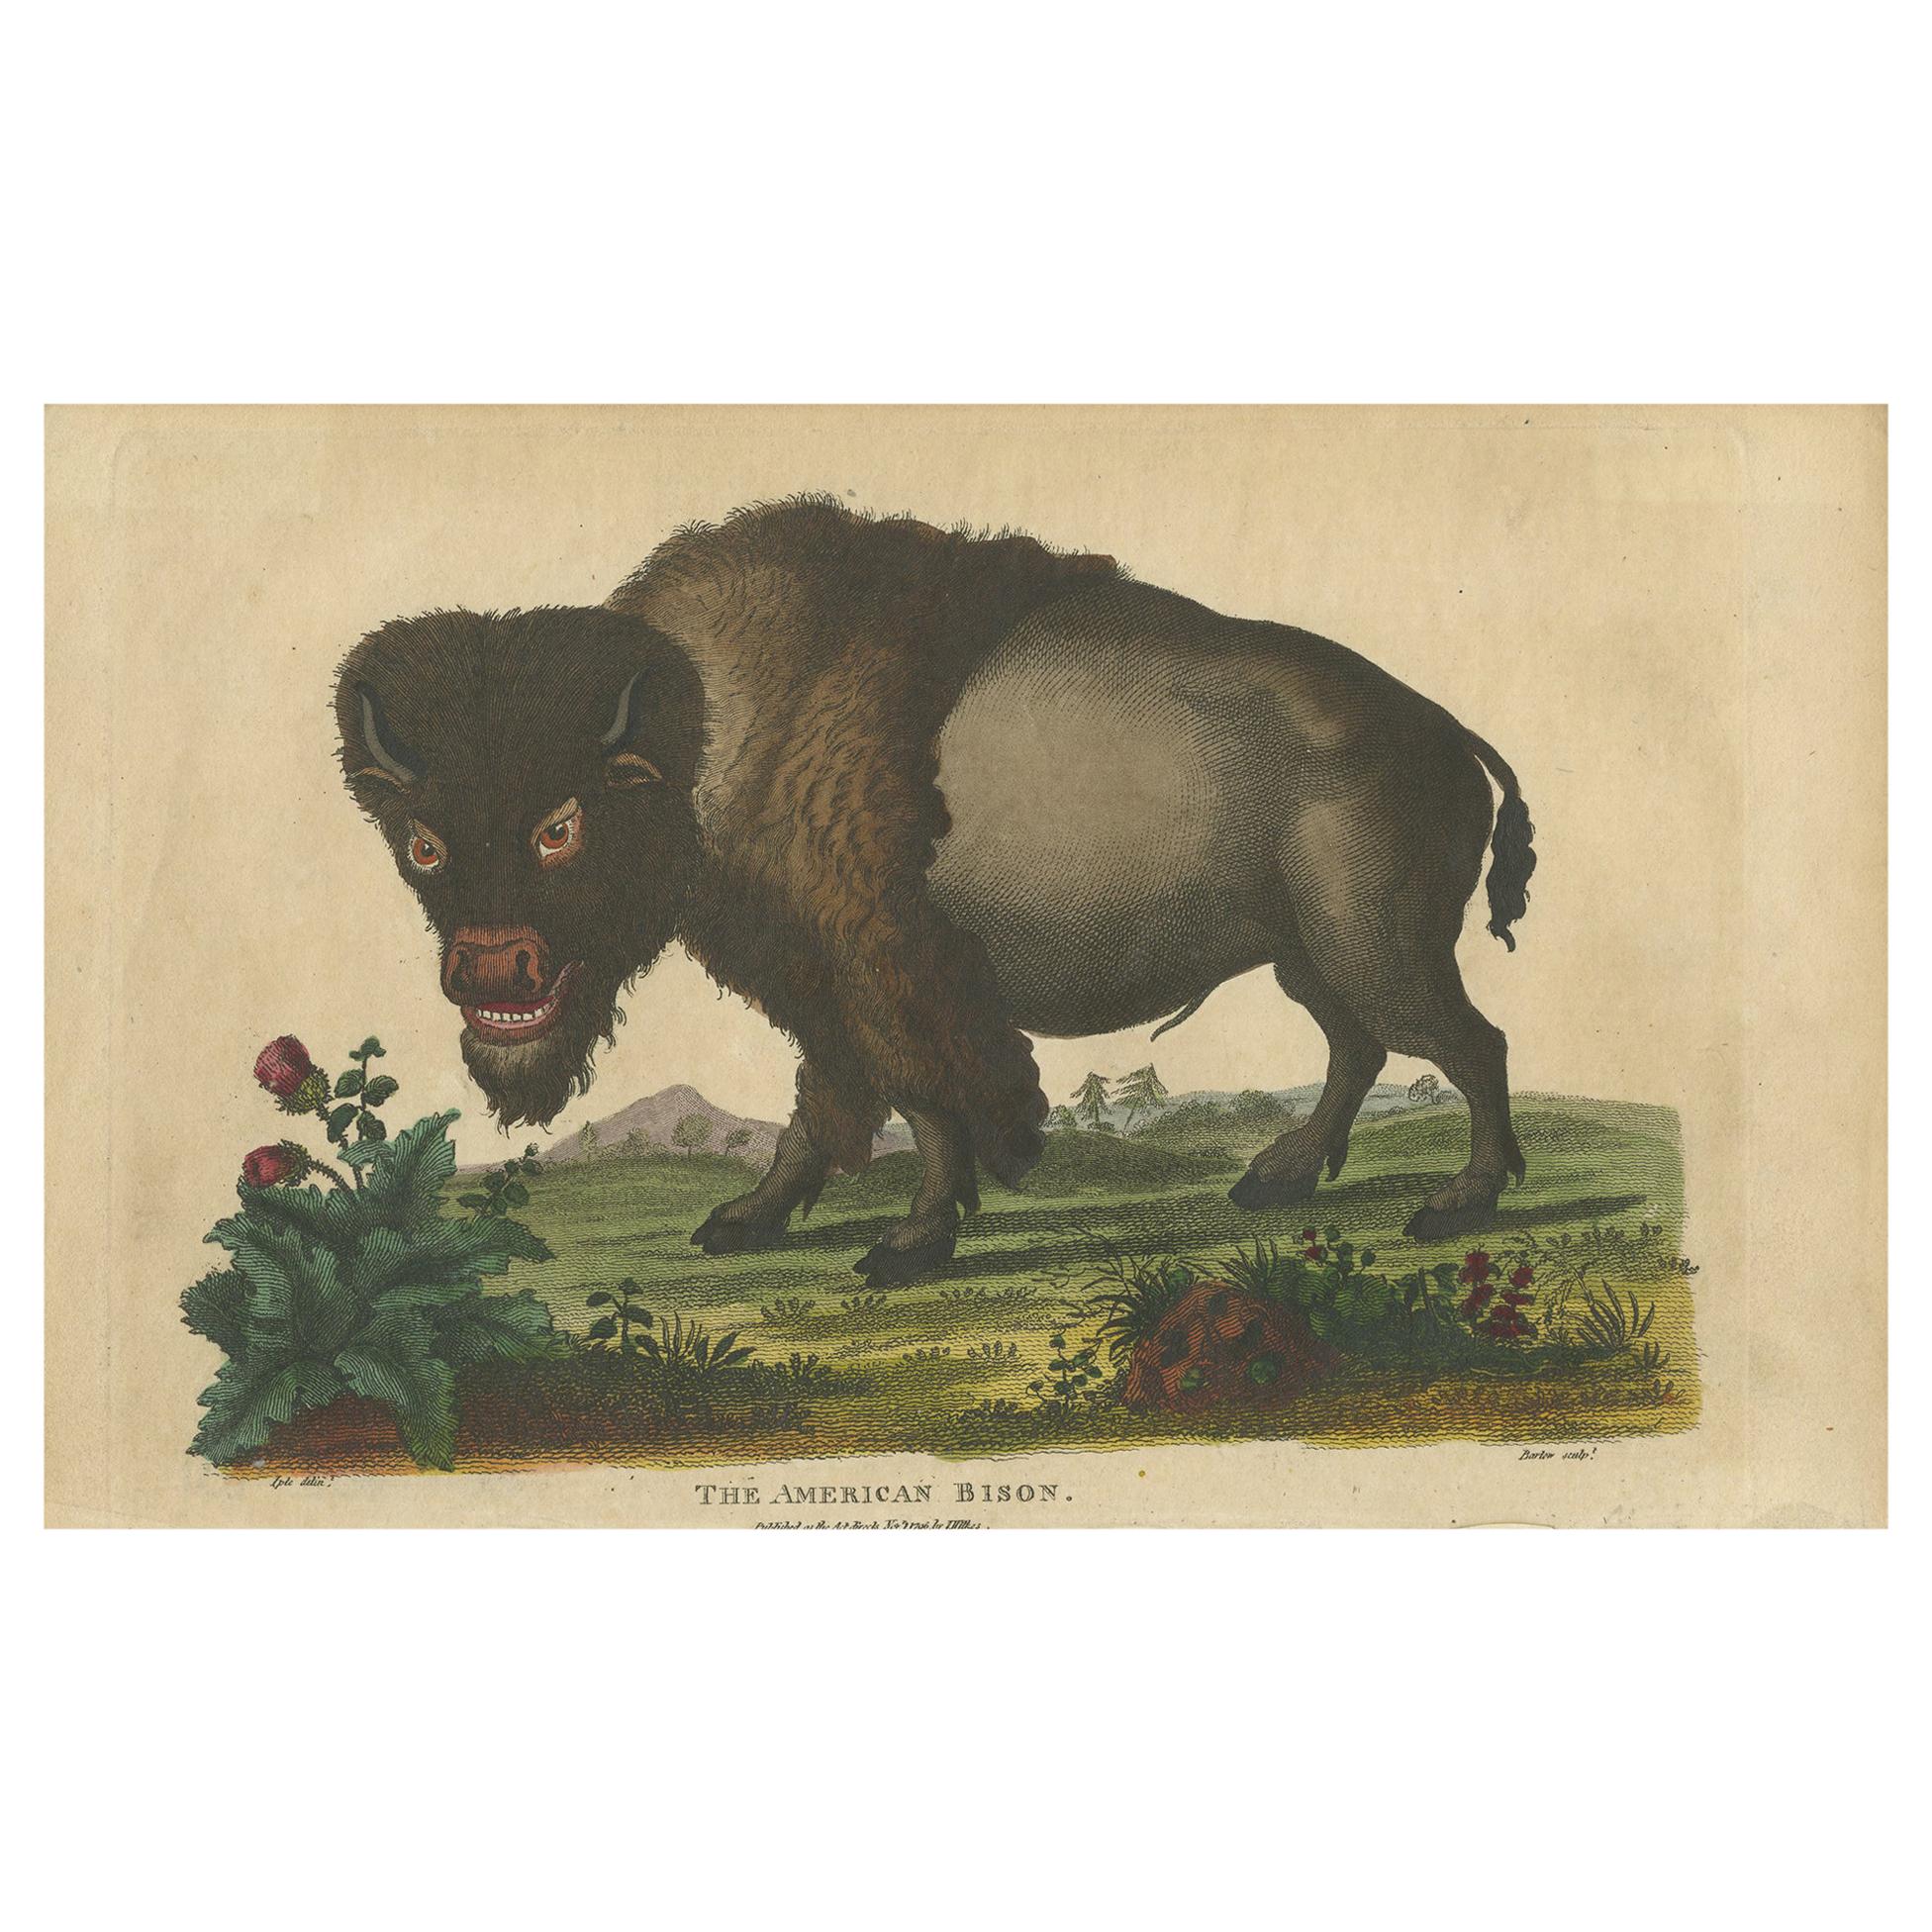 Antique Print of an American Bison by Wilkes, 1796